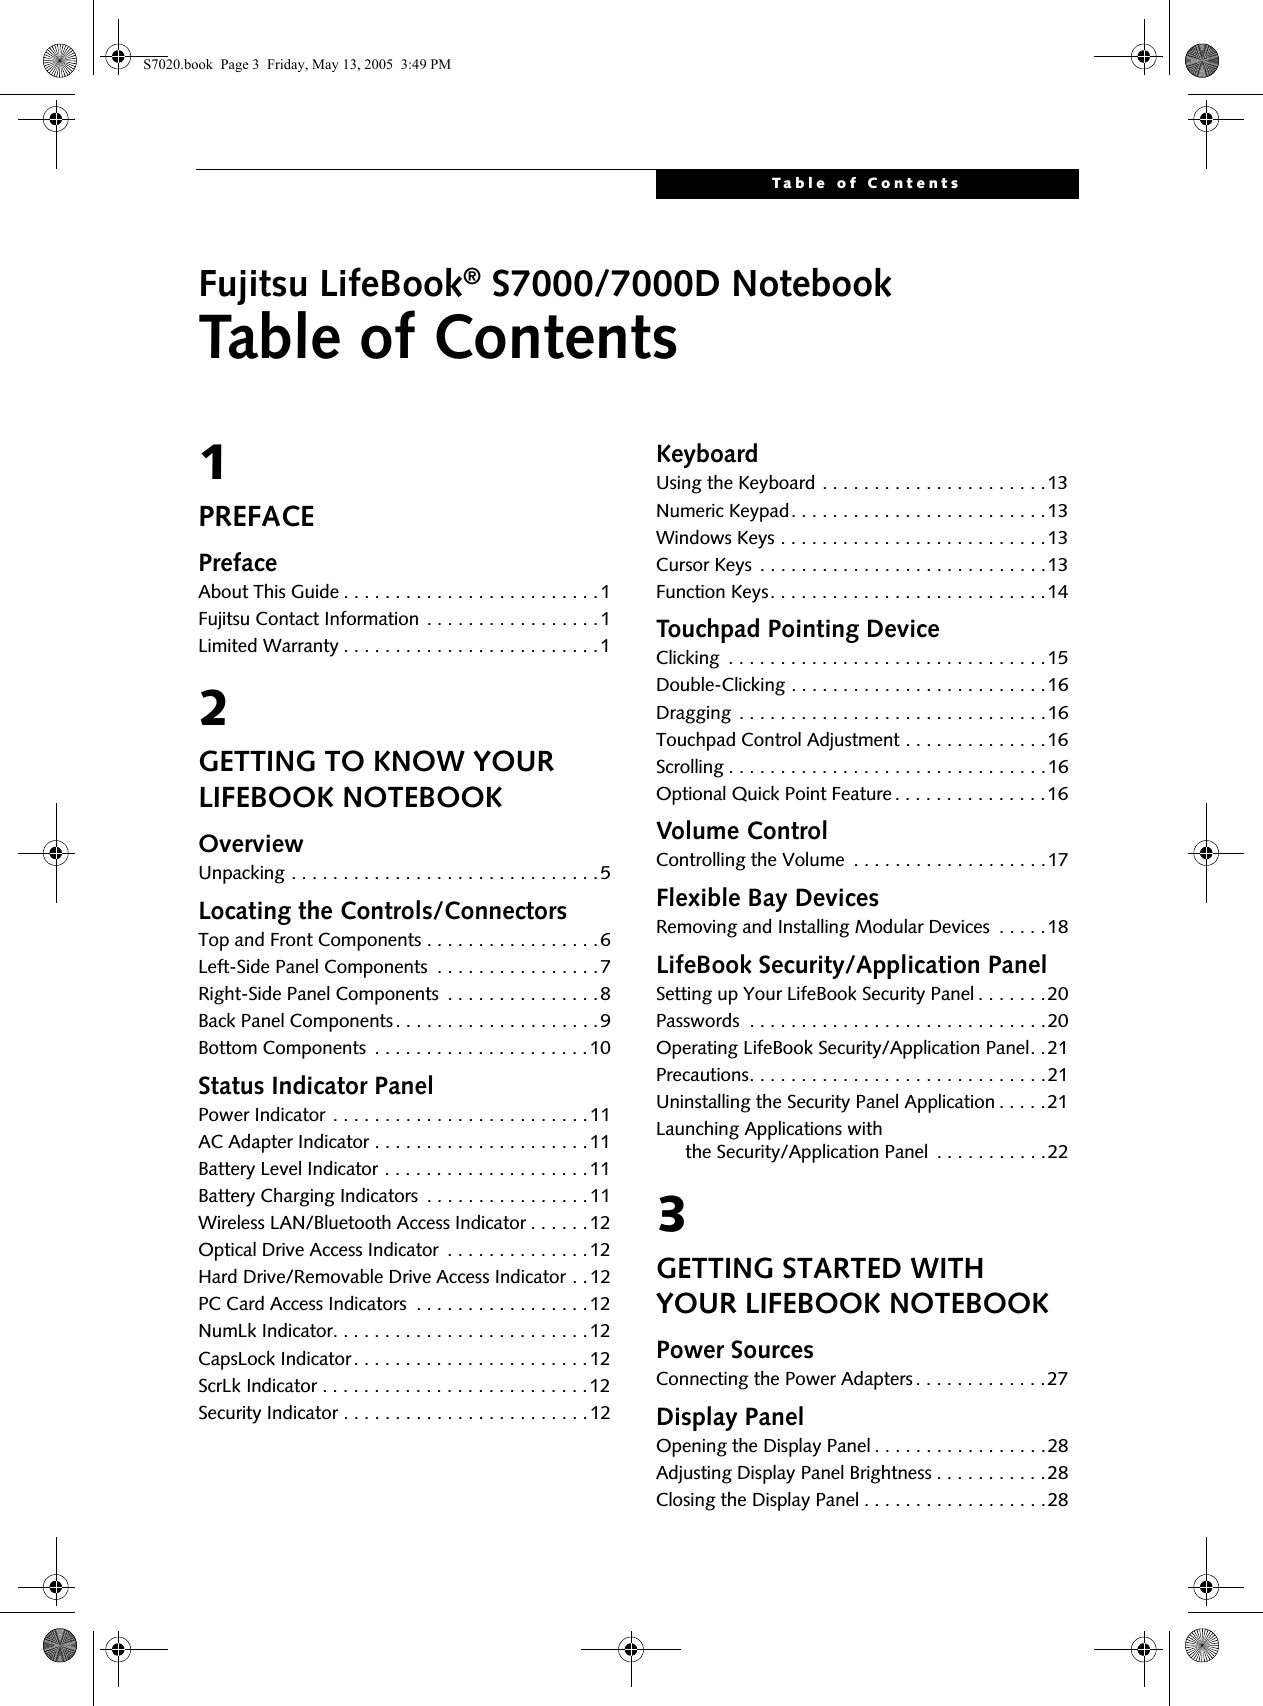 Table of ContentsFujitsu LifeBook® S7000/7000D NotebookTable of Contents1PREFACEPrefaceAbout This Guide . . . . . . . . . . . . . . . . . . . . . . . . .1Fujitsu Contact Information . . . . . . . . . . . . . . . . .1Limited Warranty . . . . . . . . . . . . . . . . . . . . . . . . .12GETTING TO KNOW YOUR LIFEBOOK NOTEBOOKOverviewUnpacking . . . . . . . . . . . . . . . . . . . . . . . . . . . . . .5Locating the Controls/ConnectorsTop and Front Components . . . . . . . . . . . . . . . . .6Left-Side Panel Components  . . . . . . . . . . . . . . . .7Right-Side Panel Components  . . . . . . . . . . . . . . .8Back Panel Components. . . . . . . . . . . . . . . . . . . .9Bottom Components  . . . . . . . . . . . . . . . . . . . . .10Status Indicator PanelPower Indicator . . . . . . . . . . . . . . . . . . . . . . . . .11AC Adapter Indicator . . . . . . . . . . . . . . . . . . . . .11Battery Level Indicator . . . . . . . . . . . . . . . . . . . .11Battery Charging Indicators  . . . . . . . . . . . . . . . .11Wireless LAN/Bluetooth Access Indicator . . . . . .12Optical Drive Access Indicator  . . . . . . . . . . . . . .12Hard Drive/Removable Drive Access Indicator . . 12PC Card Access Indicators  . . . . . . . . . . . . . . . . .12NumLk Indicator. . . . . . . . . . . . . . . . . . . . . . . . .12CapsLock Indicator. . . . . . . . . . . . . . . . . . . . . . .12ScrLk Indicator . . . . . . . . . . . . . . . . . . . . . . . . . .12Security Indicator . . . . . . . . . . . . . . . . . . . . . . . .12KeyboardUsing the Keyboard . . . . . . . . . . . . . . . . . . . . . .13Numeric Keypad. . . . . . . . . . . . . . . . . . . . . . . . .13Windows Keys . . . . . . . . . . . . . . . . . . . . . . . . . .13Cursor Keys  . . . . . . . . . . . . . . . . . . . . . . . . . . . .13Function Keys. . . . . . . . . . . . . . . . . . . . . . . . . . .14Touchpad Pointing DeviceClicking  . . . . . . . . . . . . . . . . . . . . . . . . . . . . . . .15Double-Clicking . . . . . . . . . . . . . . . . . . . . . . . . .16Dragging  . . . . . . . . . . . . . . . . . . . . . . . . . . . . . .16Touchpad Control Adjustment . . . . . . . . . . . . . .16Scrolling . . . . . . . . . . . . . . . . . . . . . . . . . . . . . . .16Optional Quick Point Feature . . . . . . . . . . . . . . .16Volume ControlControlling the Volume  . . . . . . . . . . . . . . . . . . .17Flexible Bay DevicesRemoving and Installing Modular Devices  . . . . .18LifeBook Security/Application PanelSetting up Your LifeBook Security Panel . . . . . . .20Passwords  . . . . . . . . . . . . . . . . . . . . . . . . . . . . .20Operating LifeBook Security/Application Panel. .21Precautions. . . . . . . . . . . . . . . . . . . . . . . . . . . . .21Uninstalling the Security Panel Application . . . . .21Launching Applications with     the Security/Application Panel  . . . . . . . . . . .223GETTING STARTED WITH YOUR LIFEBOOK NOTEBOOKPower SourcesConnecting the Power Adapters . . . . . . . . . . . . .27Display PanelOpening the Display Panel . . . . . . . . . . . . . . . . .28Adjusting Display Panel Brightness . . . . . . . . . . .28Closing the Display Panel . . . . . . . . . . . . . . . . . .28S7020.book  Page 3  Friday, May 13, 2005  3:49 PM